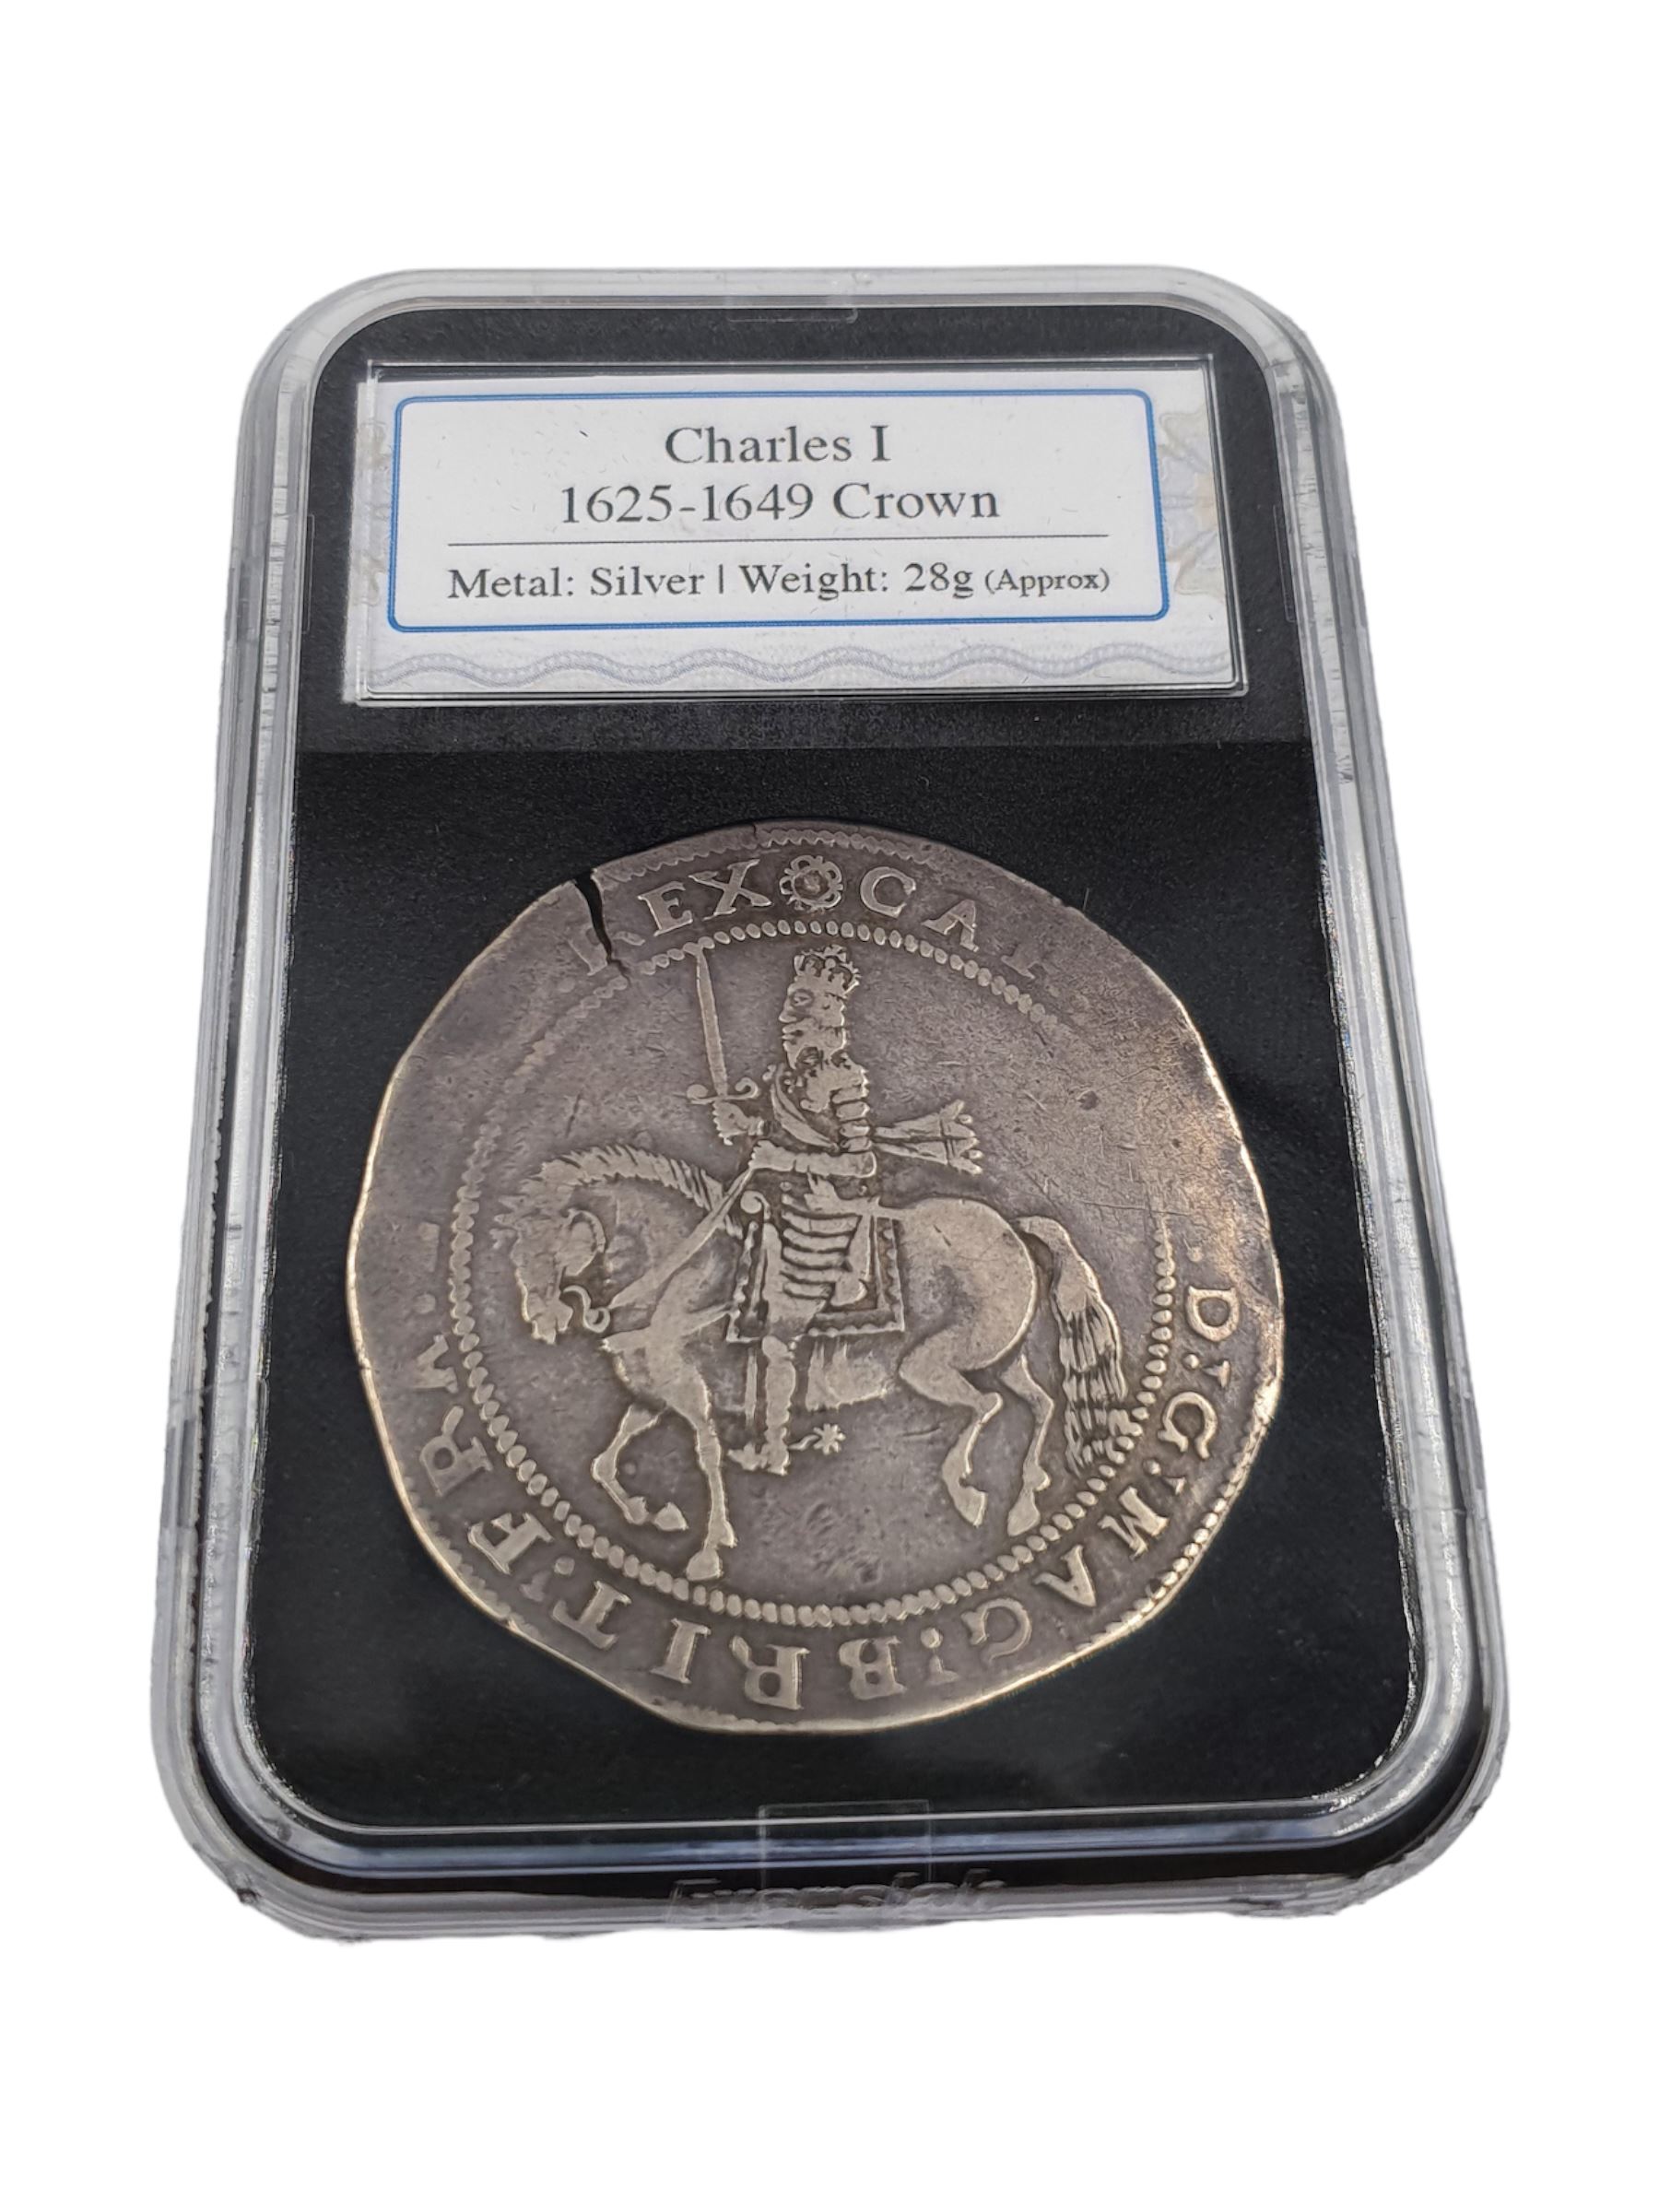 Charles I (1625-1649) silver crown coin